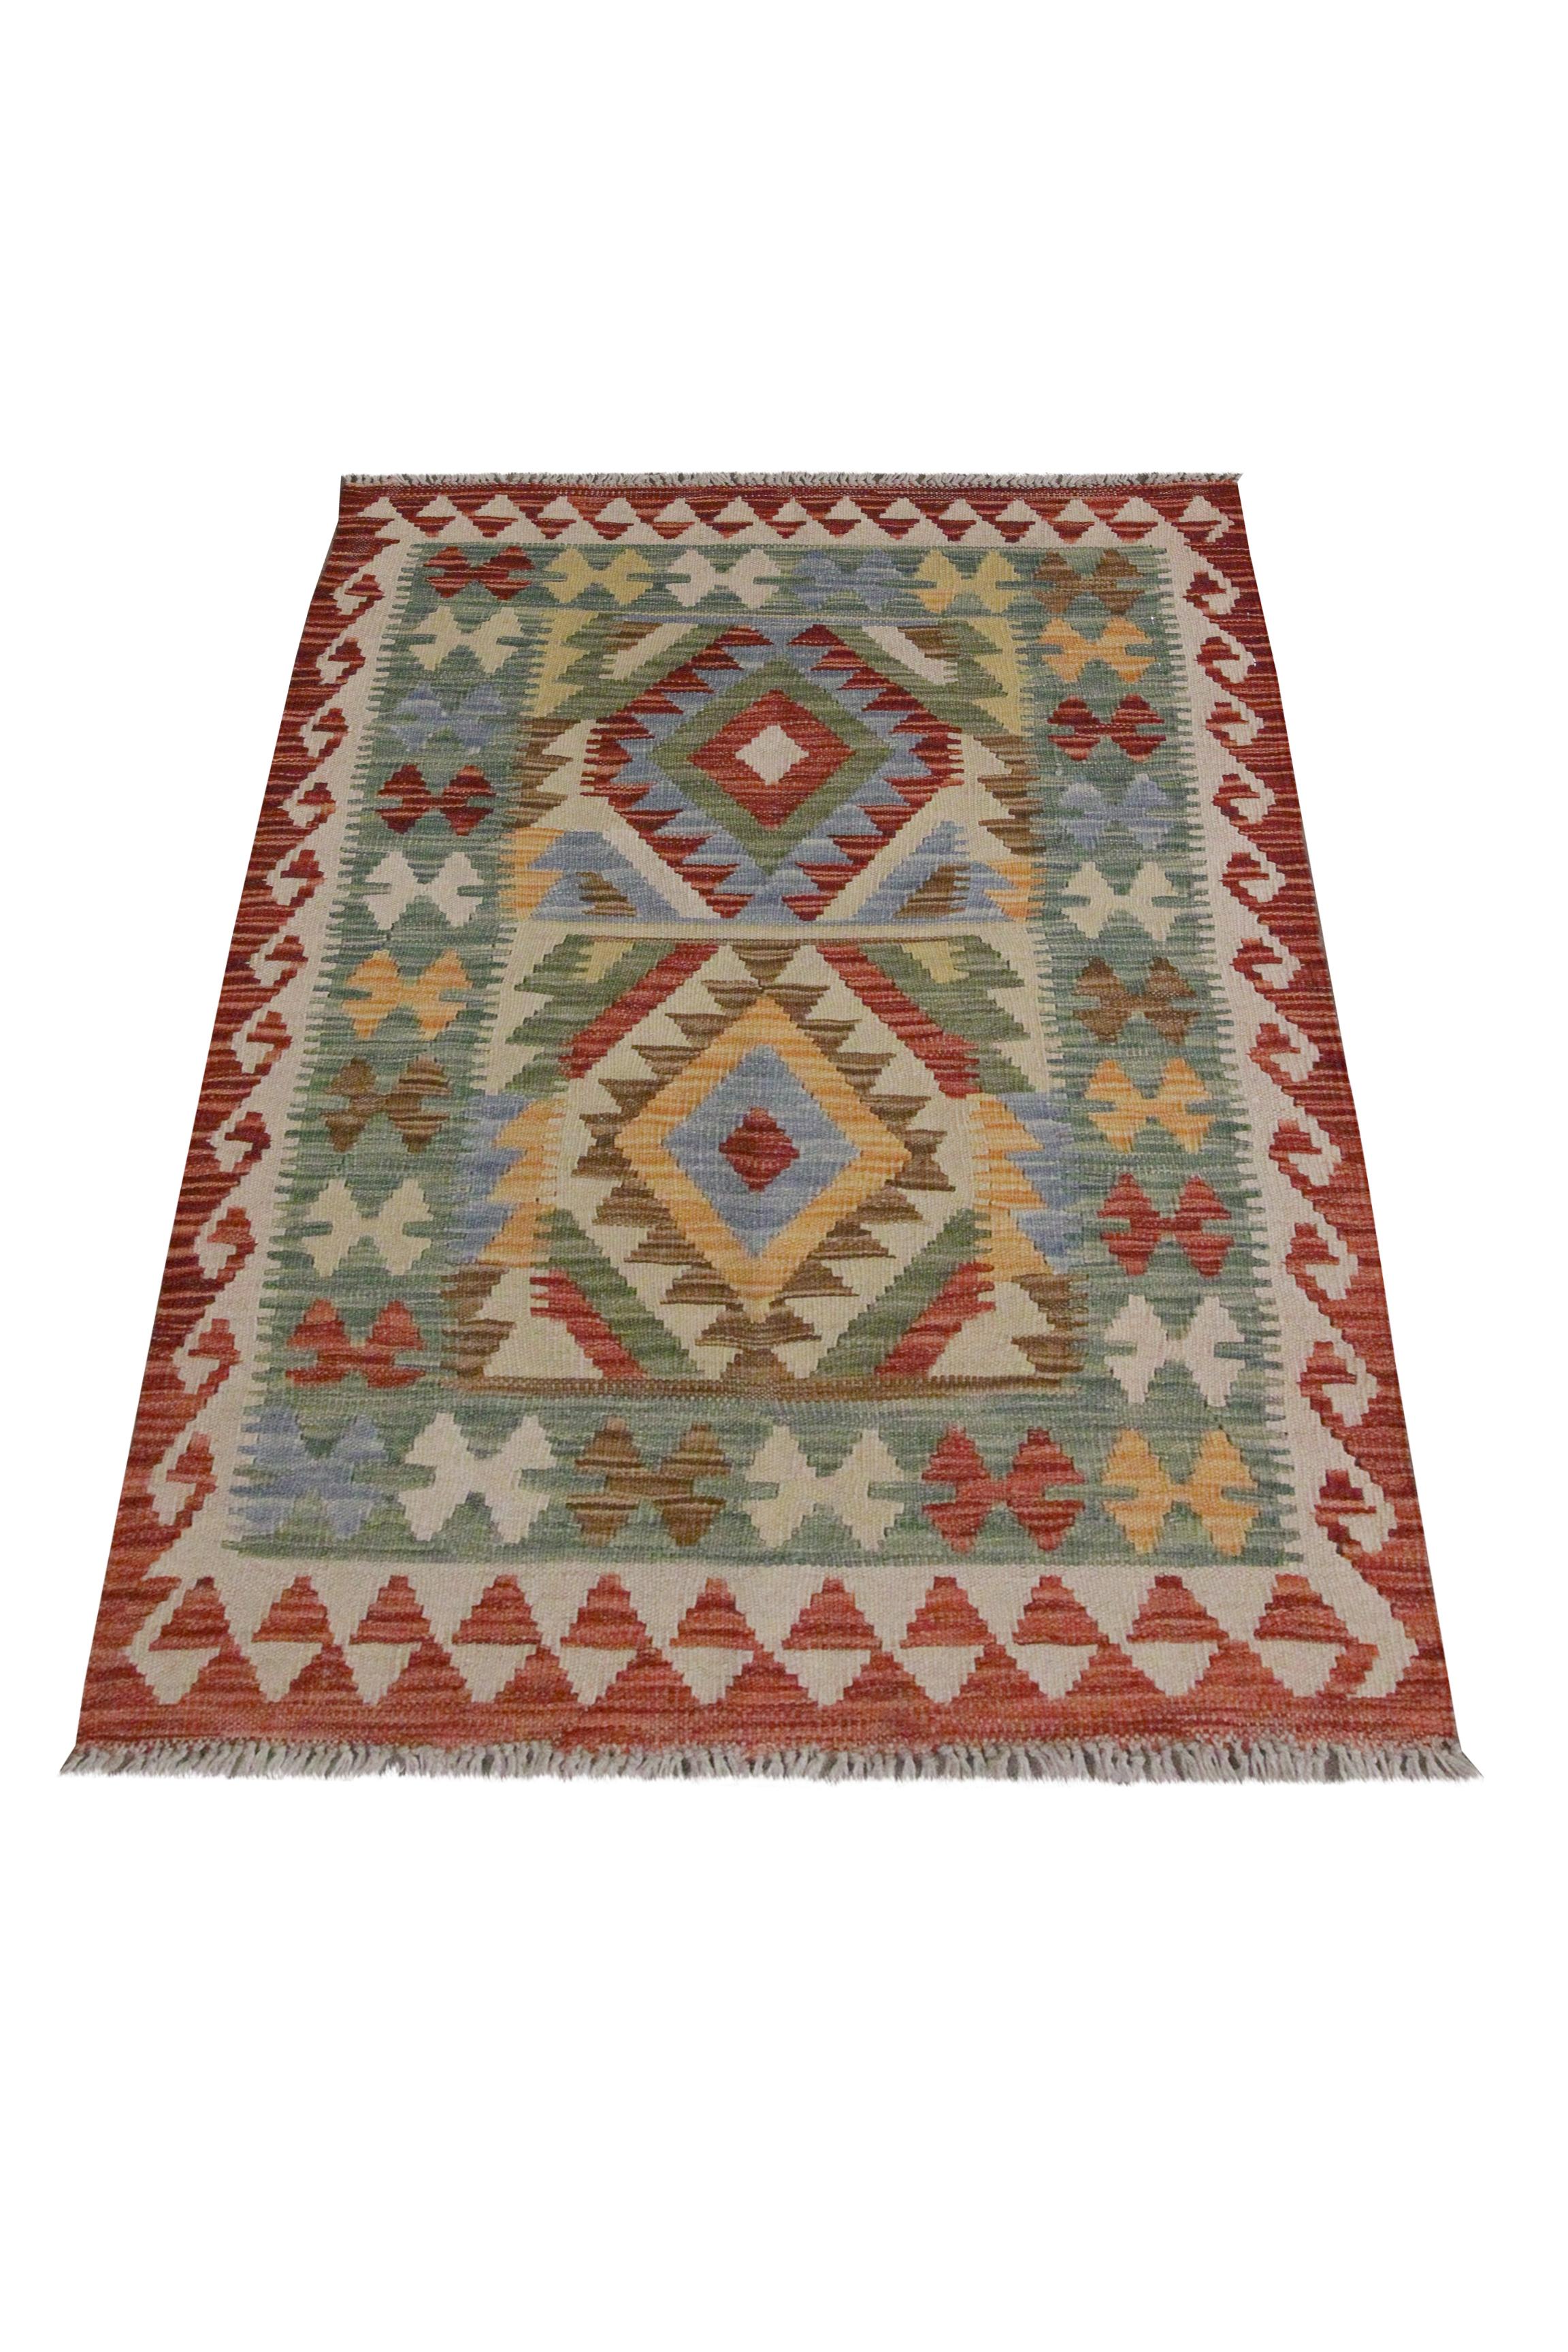 This fantastic kilim is a traditional piece woven in the early 21st century, circa 2015. The design features a typical geometric pattern with a bold colour palette of red, green and beige. The colours and design work in harmony to create this